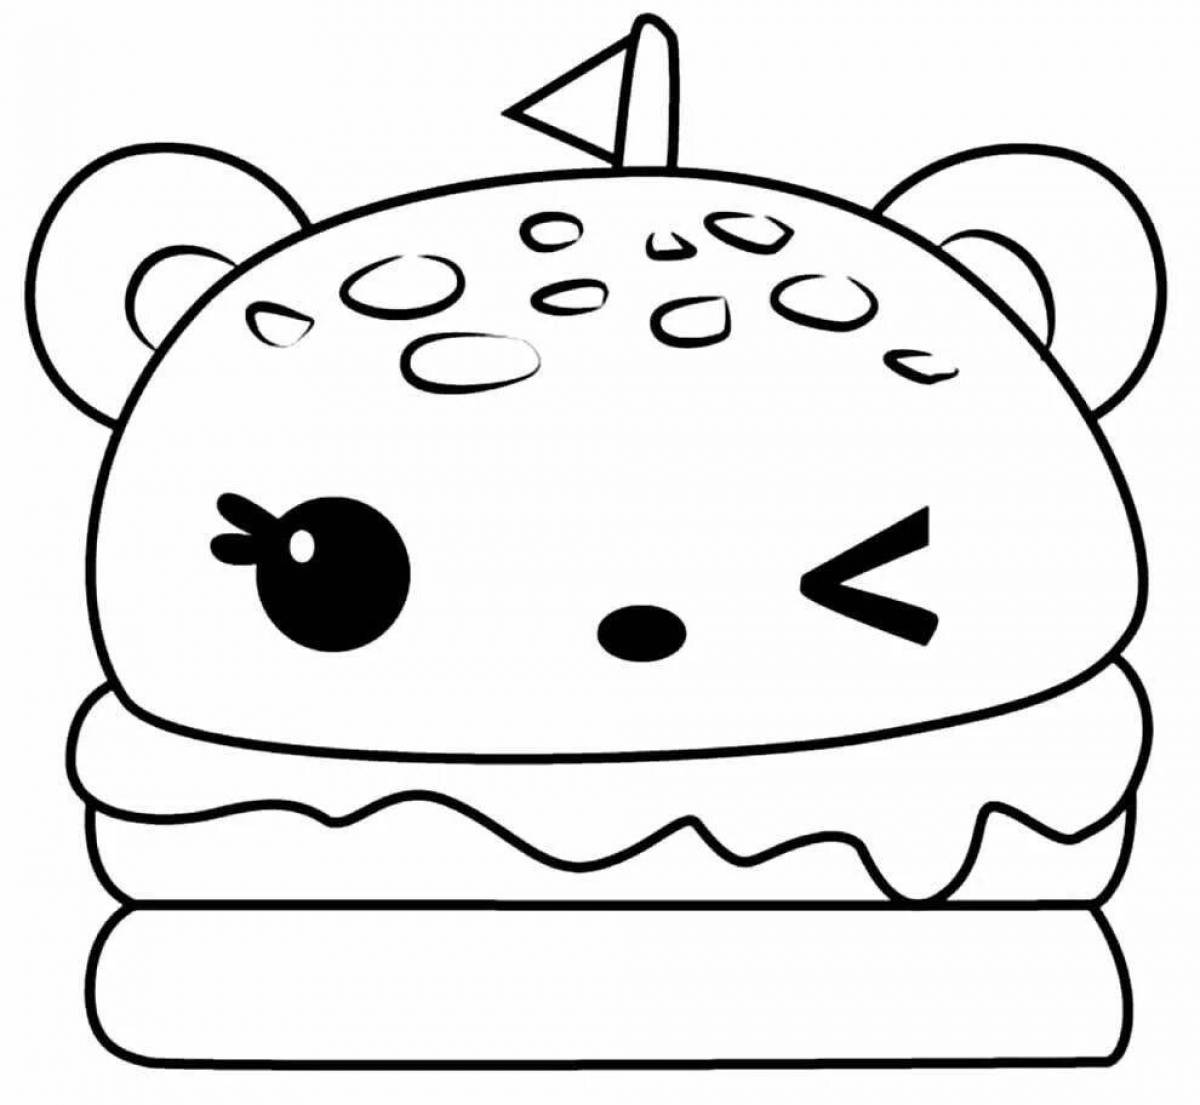 Colorful burger cat coloring page